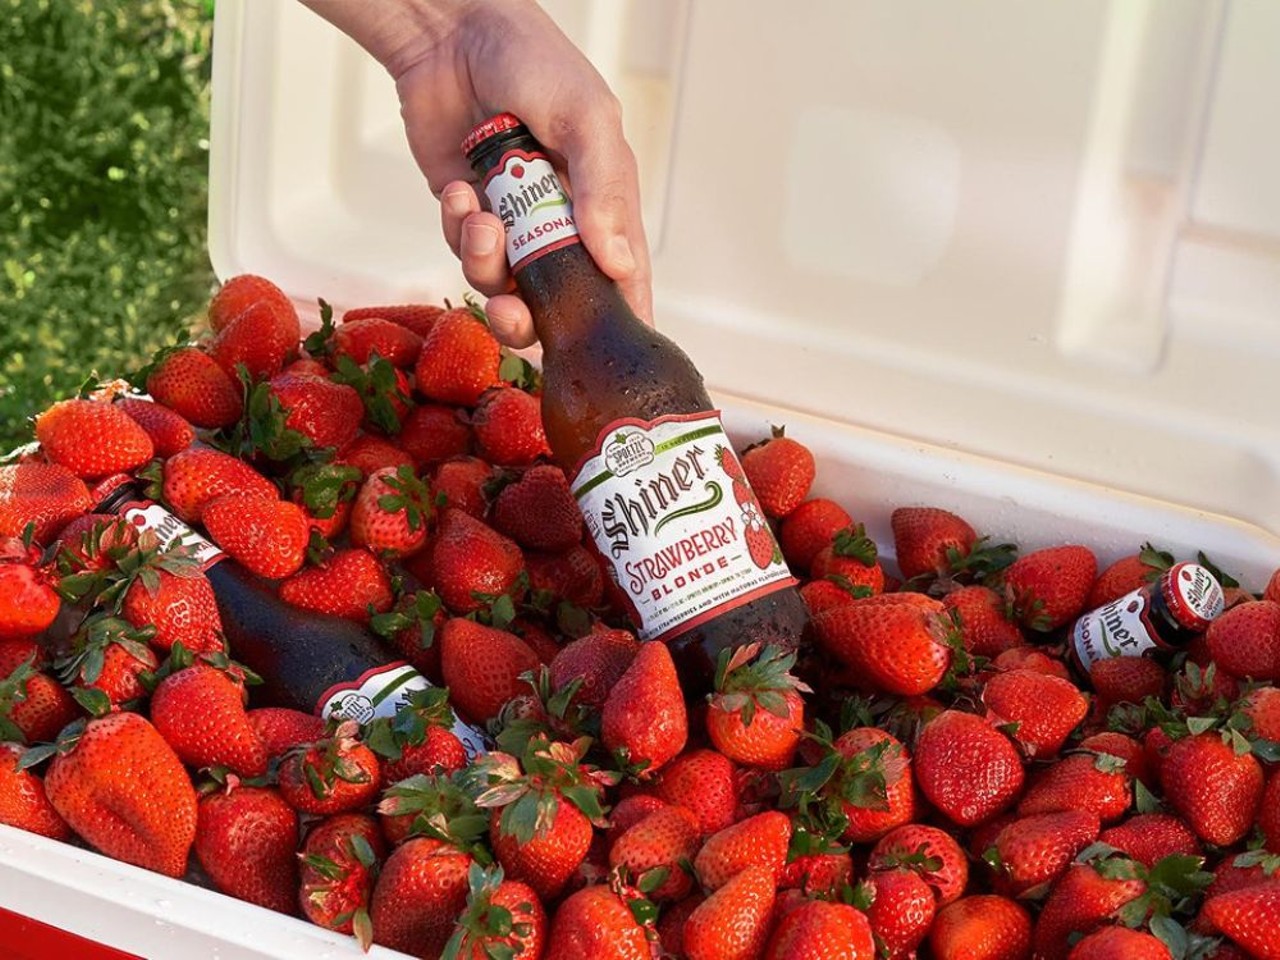 Try a locally brewed seasonal beer
There’s few things better than a cool, seasonal beer on a hot summer’s day. Try out a brew like Shiner's Strawberry Blonde, which is made with Poteet strawberries!